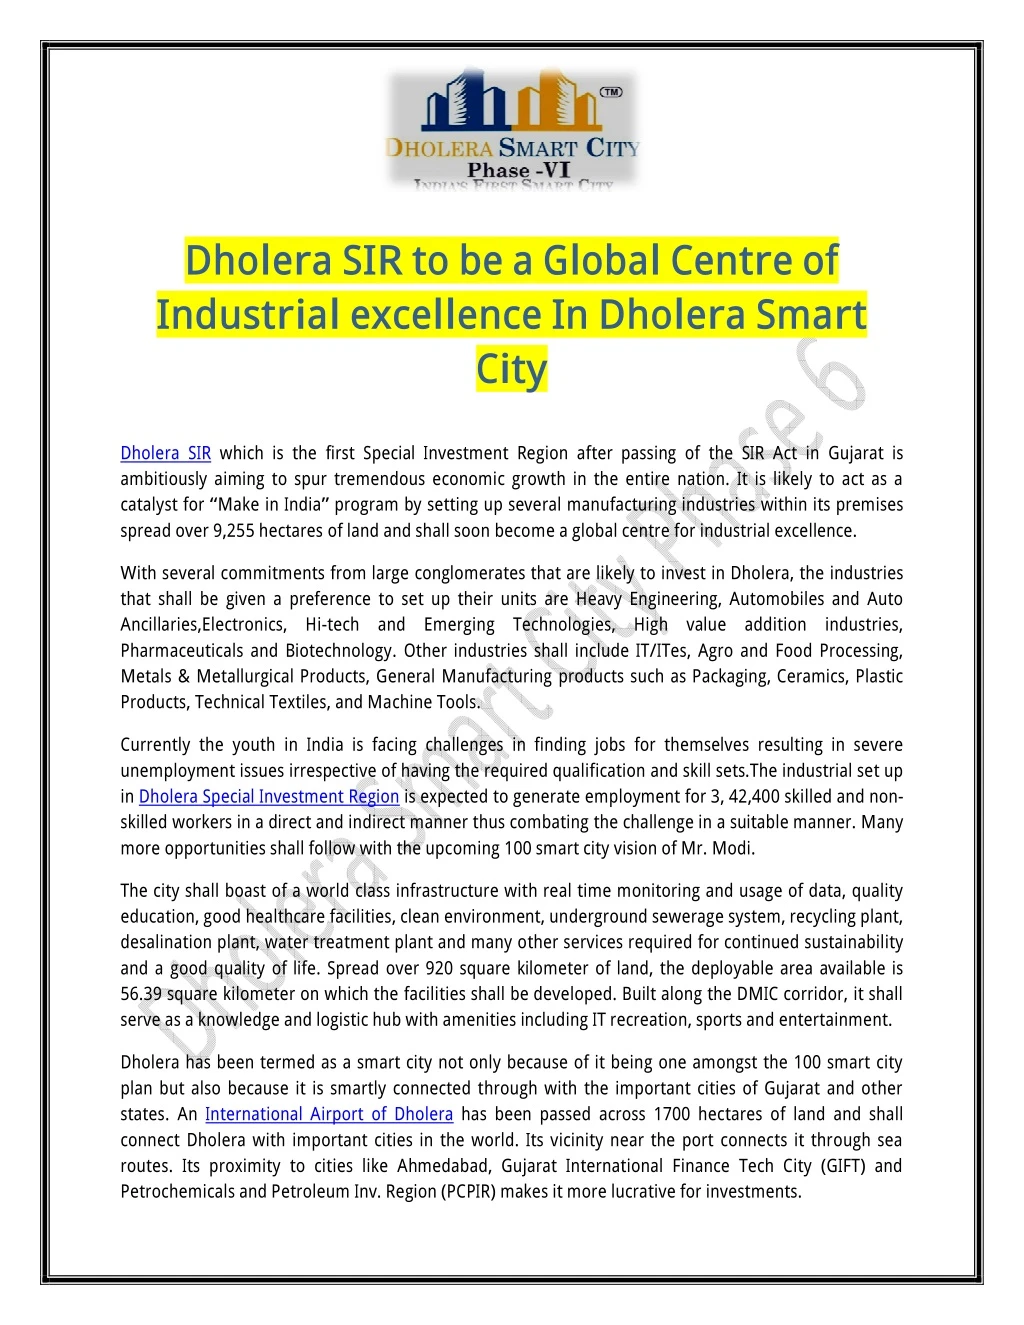 dholera sir to be a global centre of industrial